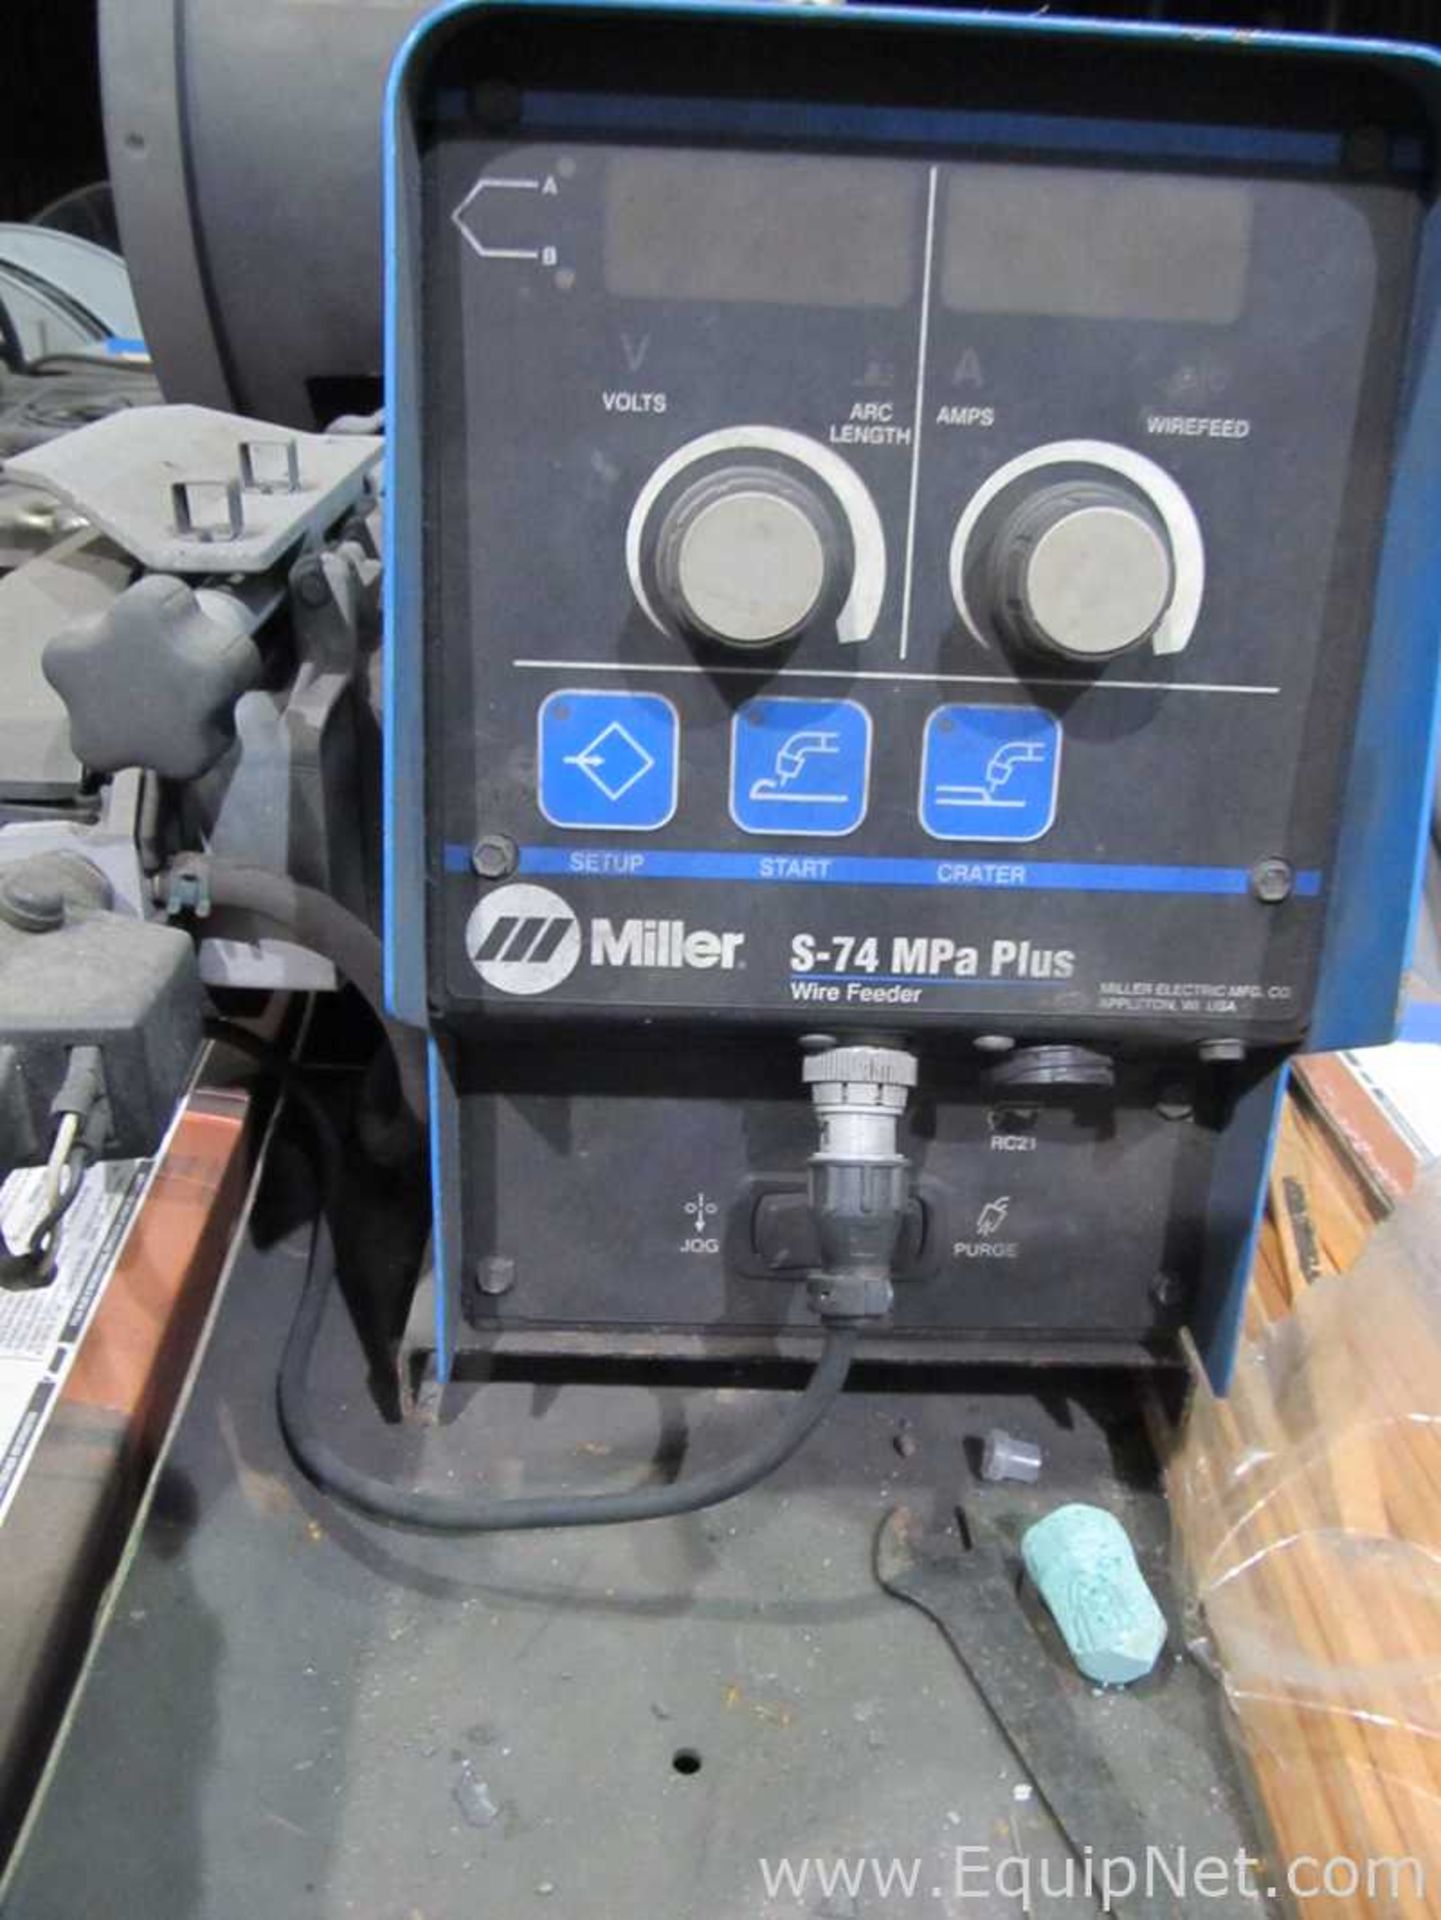 Miller XMT 456 CC/CV with S-74 MPa Plus Wire Feeder - Image 4 of 4